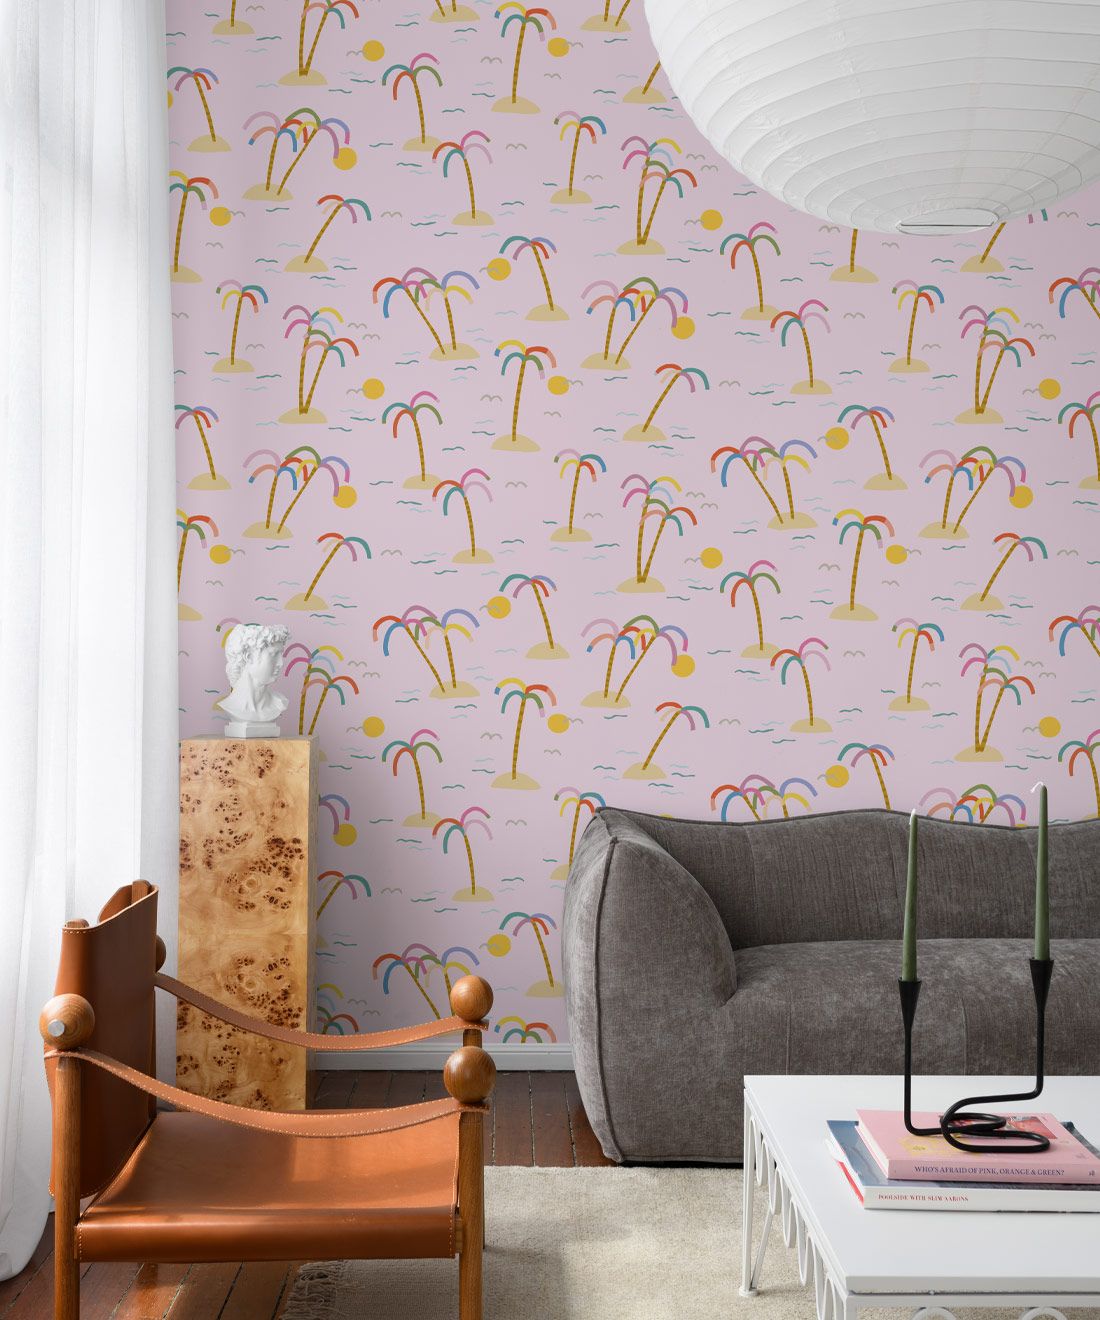 Island style wallpaper with pink background in living room.